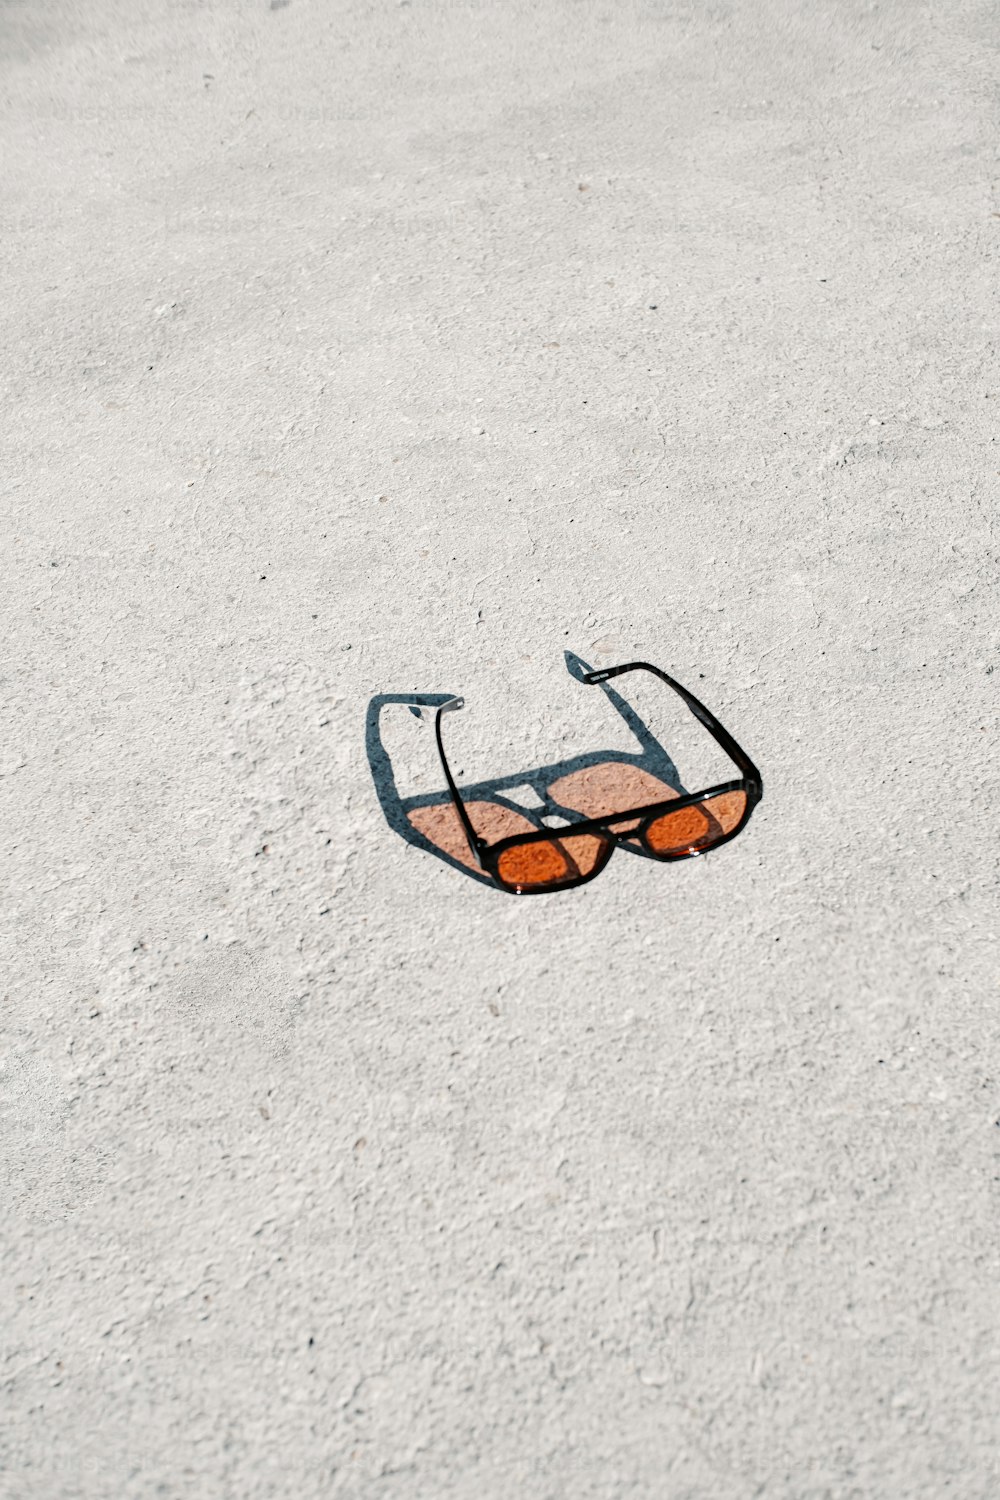 a pair of sunglasses laying on the ground